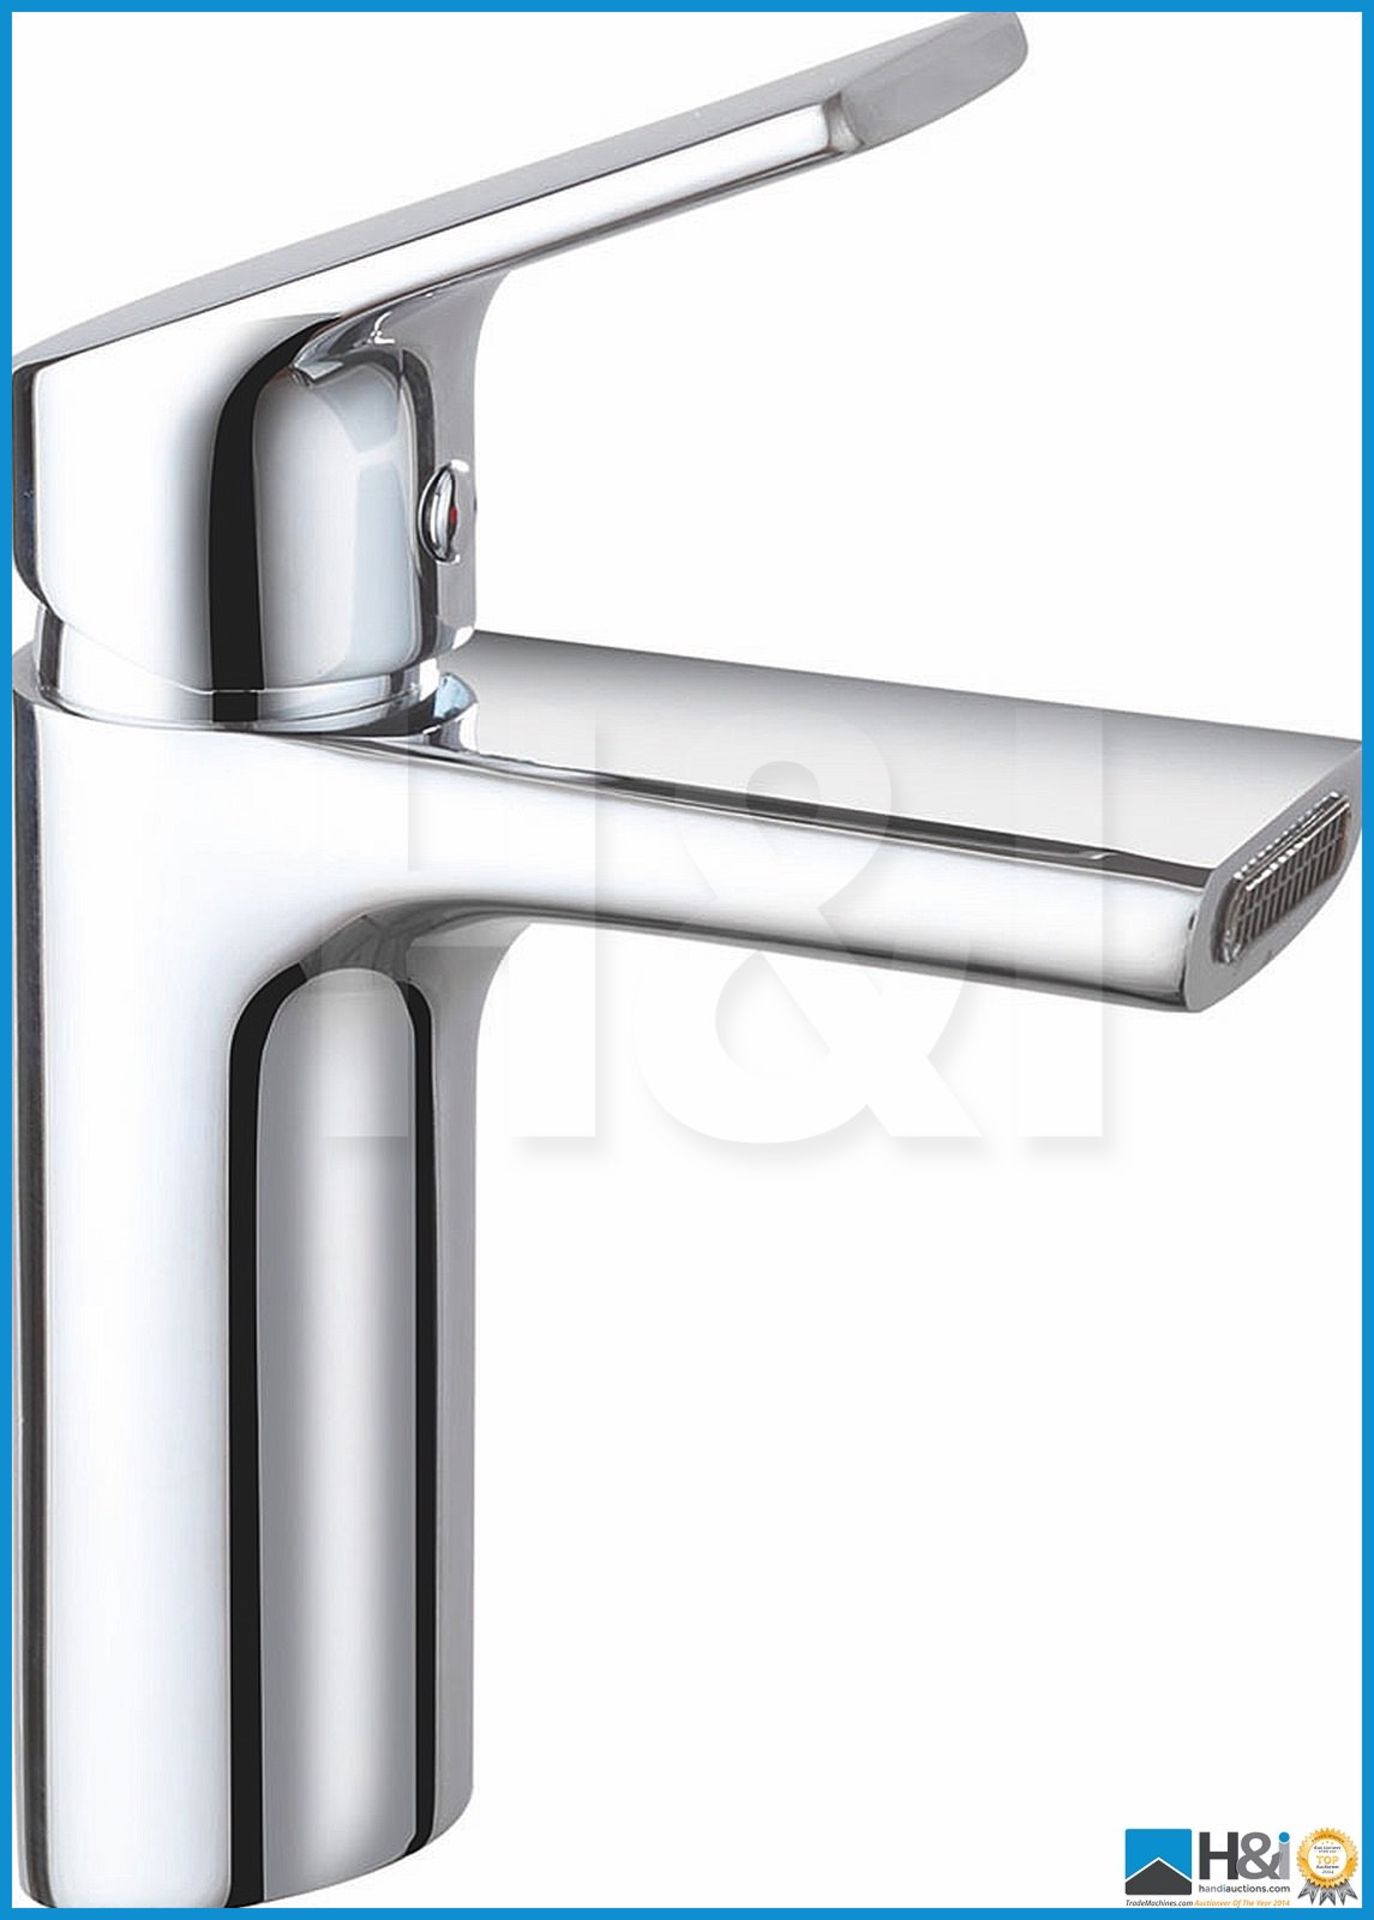 Beautiful brand new designer Siena mono tap in polished chrome finish with click waste. Suggested ma